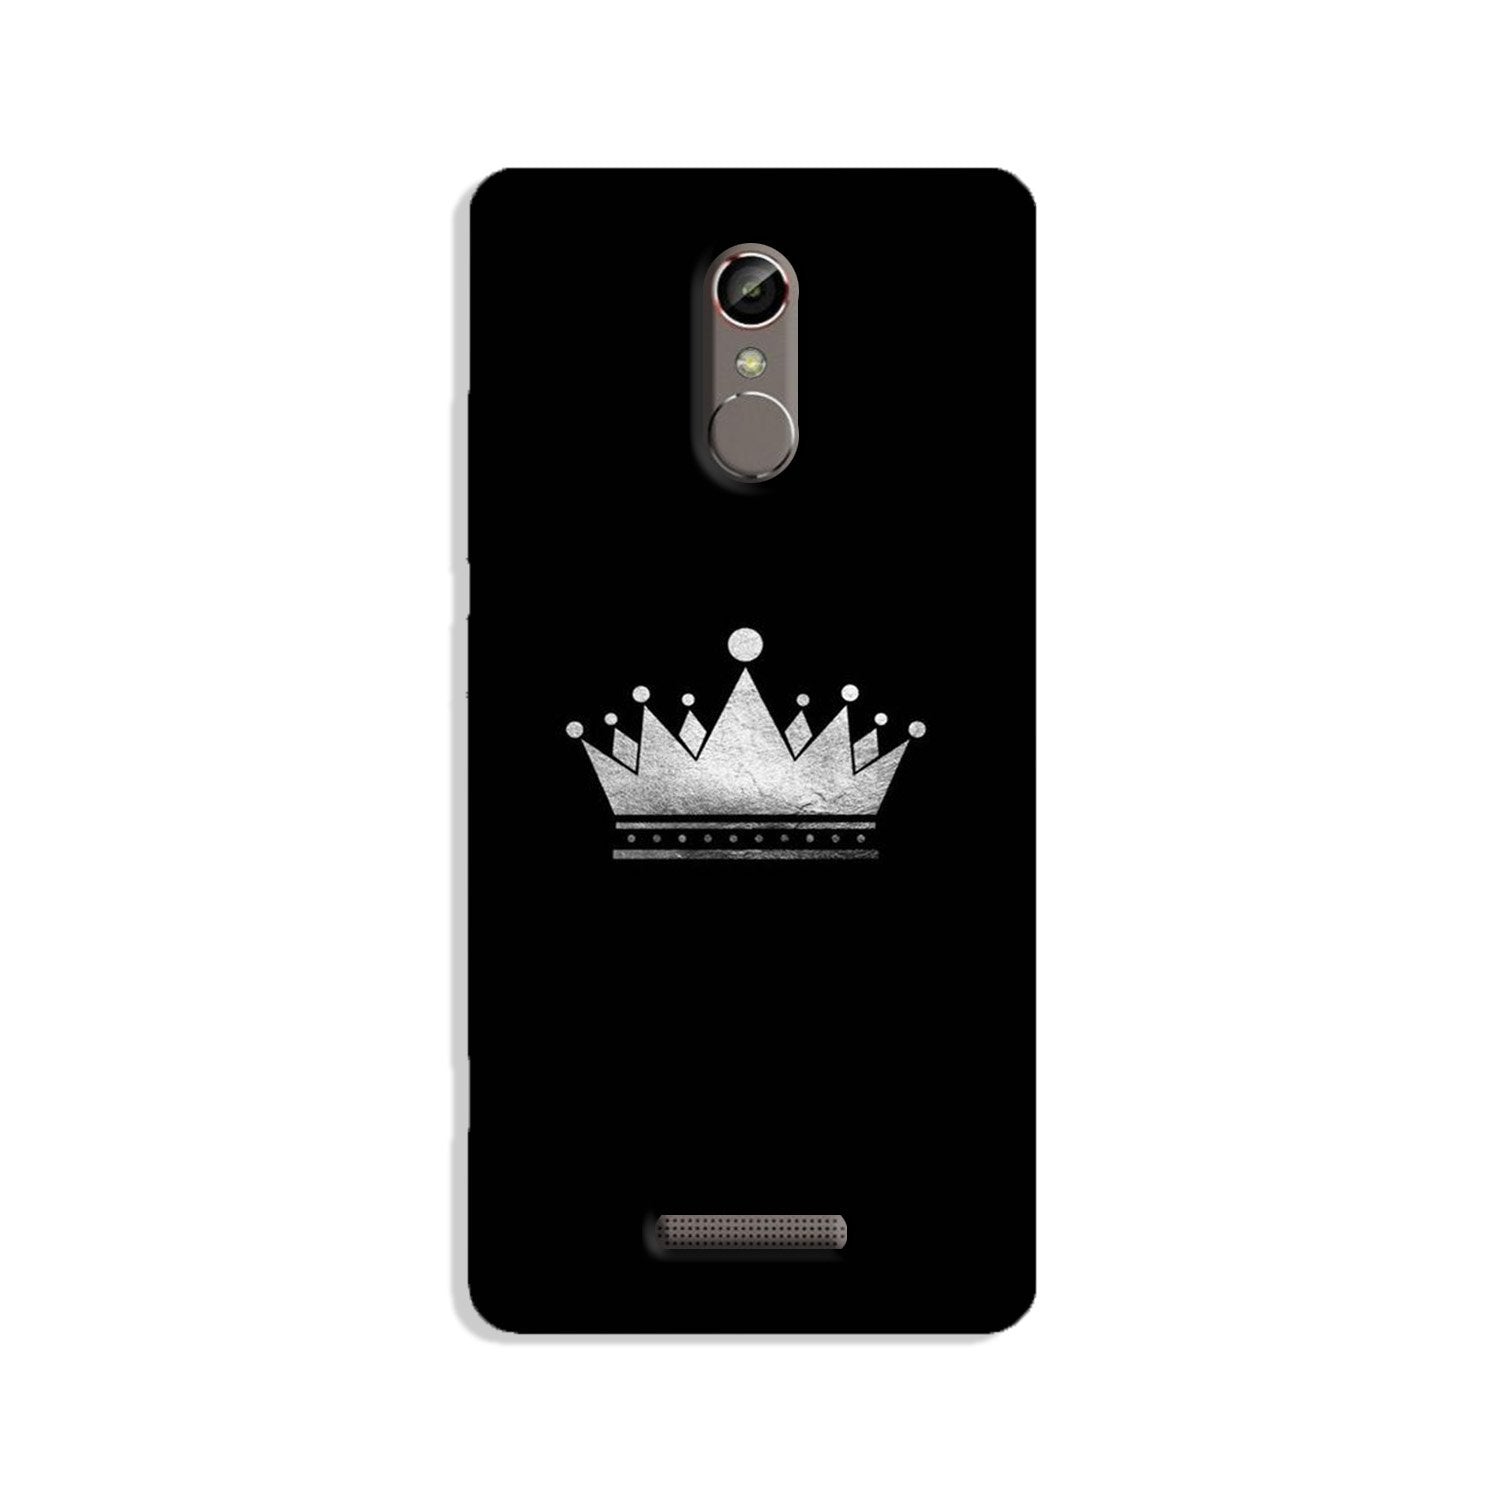 King Case for Gionee S6s (Design No. 280)